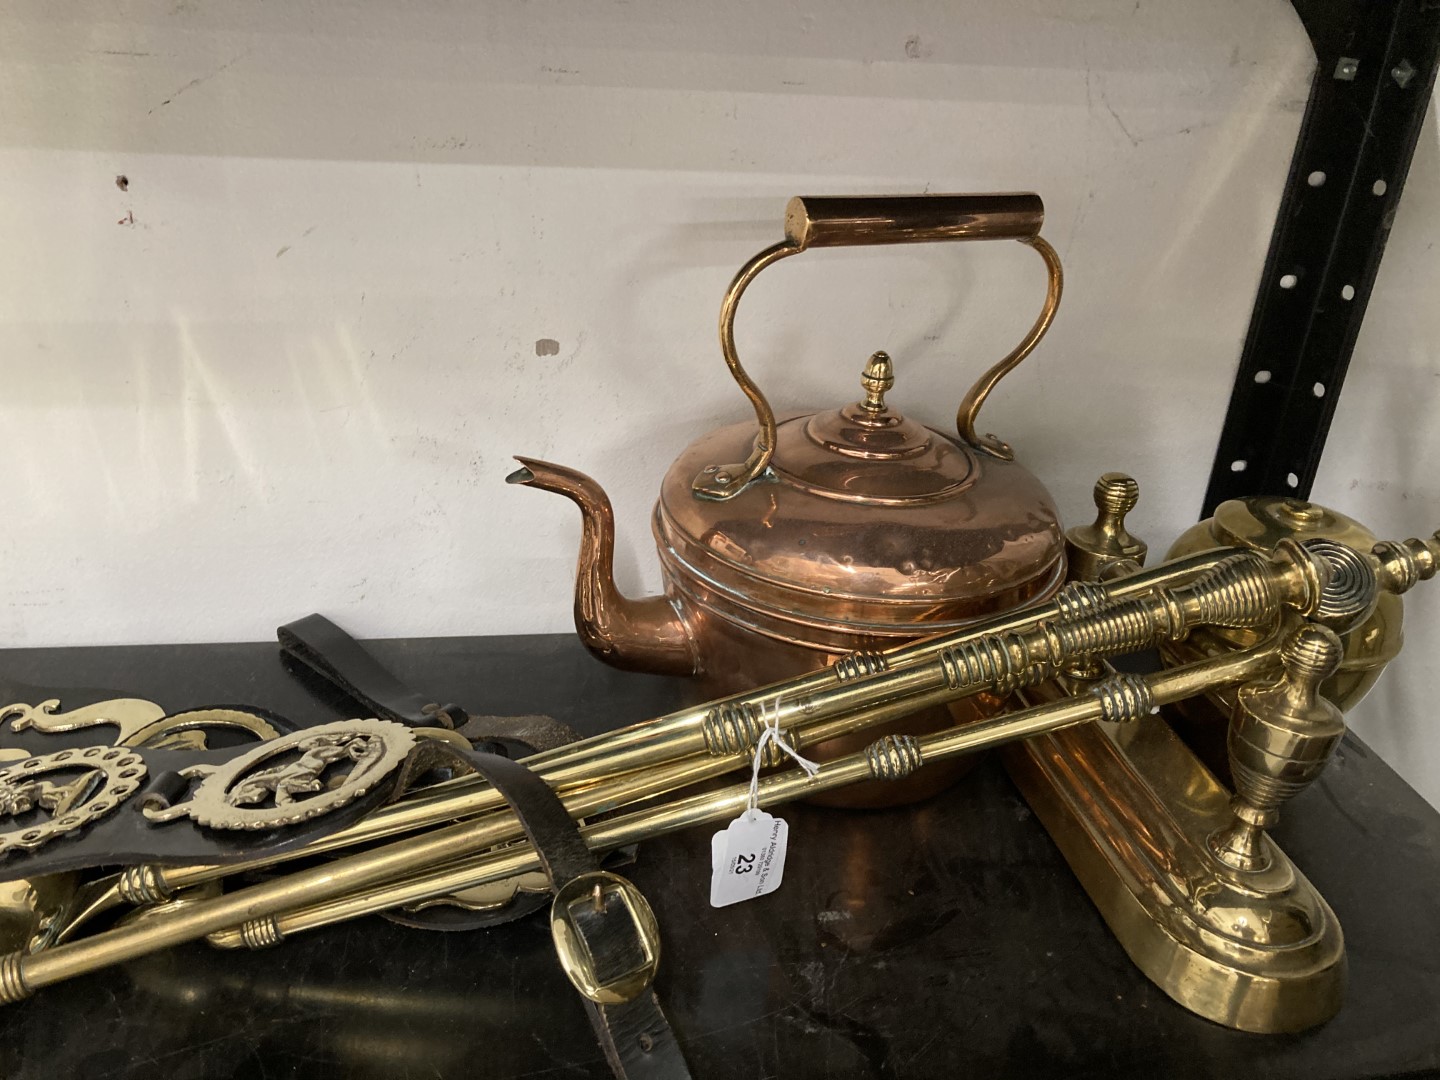 20th cent. Metalware: Brass companion set, tea caddy, horse brasses and copper kettle.